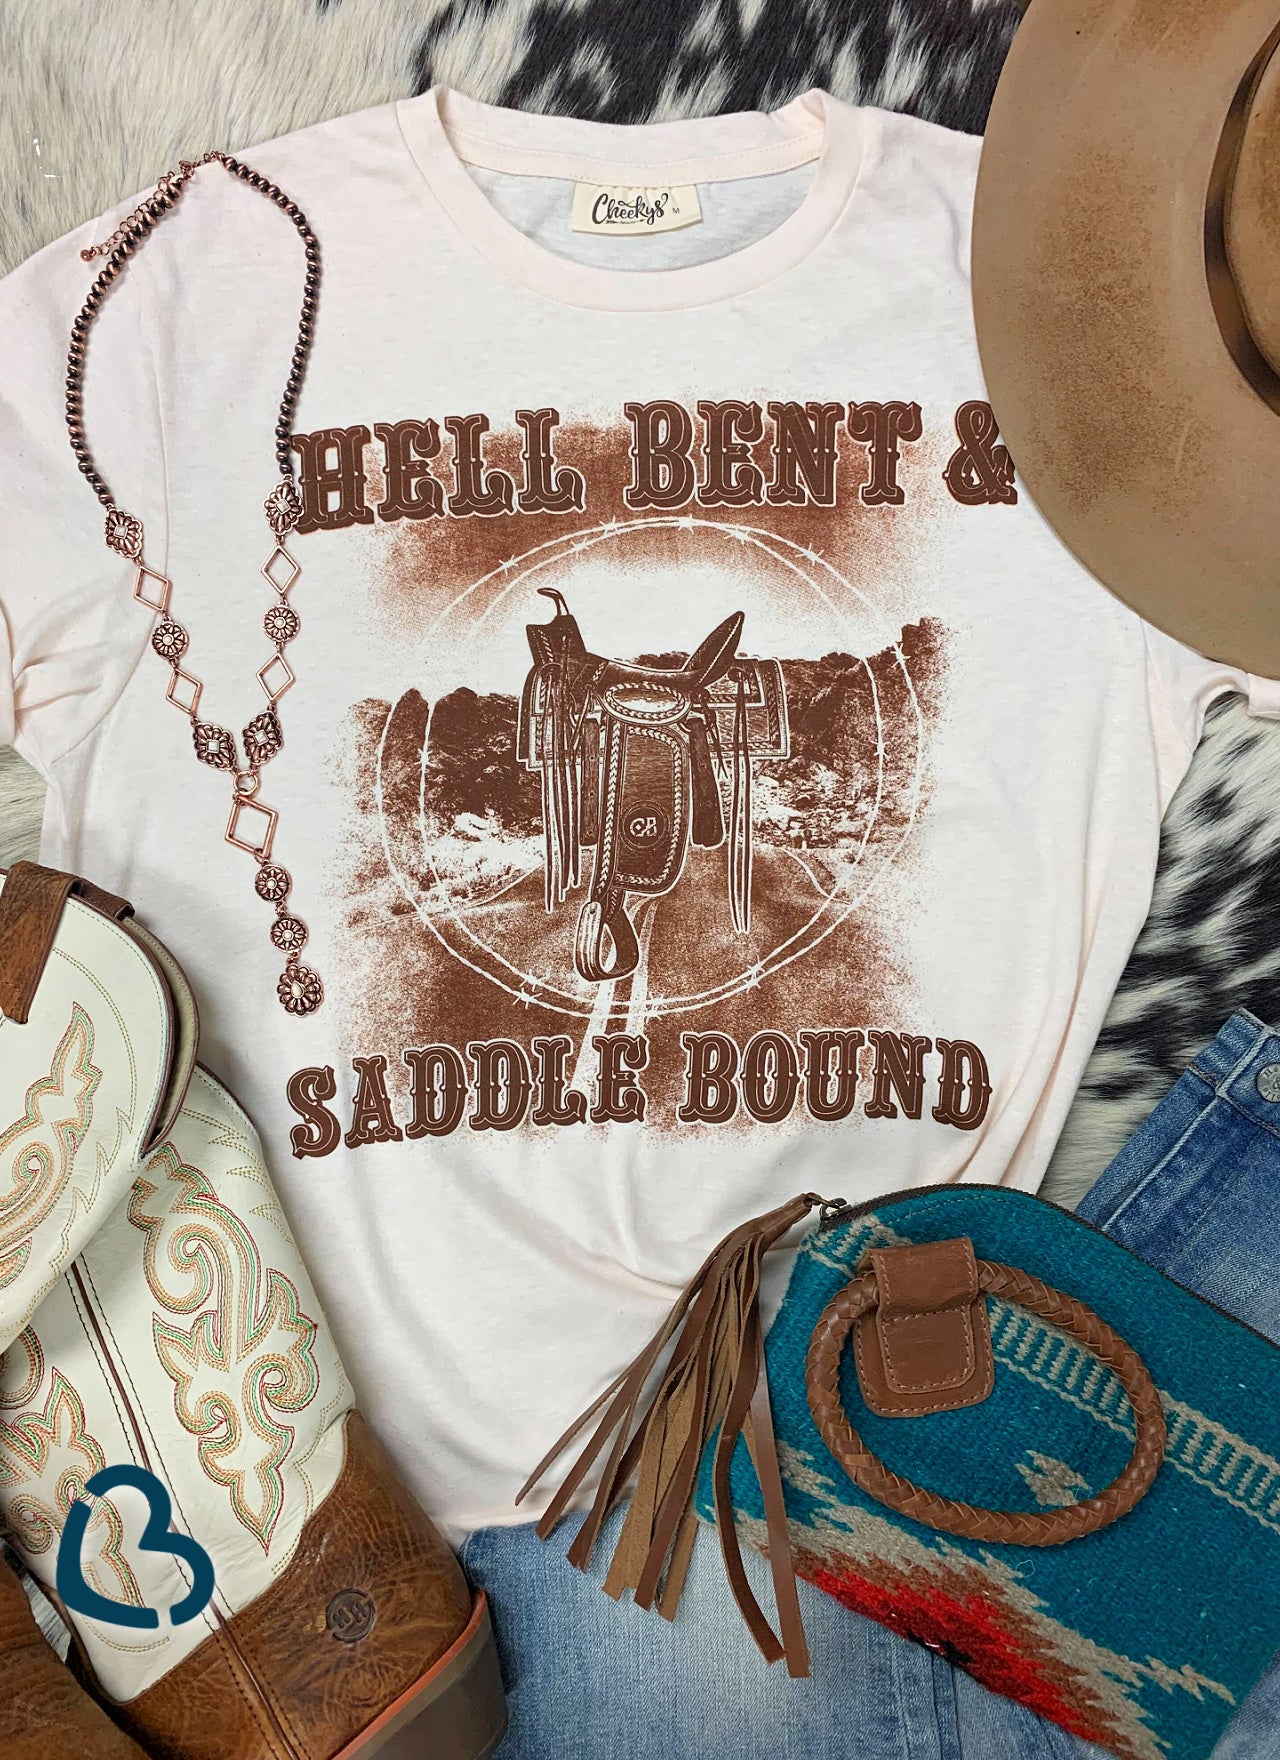 Hell Bent and Saddle Bound Unisex On Natural Cheekys Apparel 23 